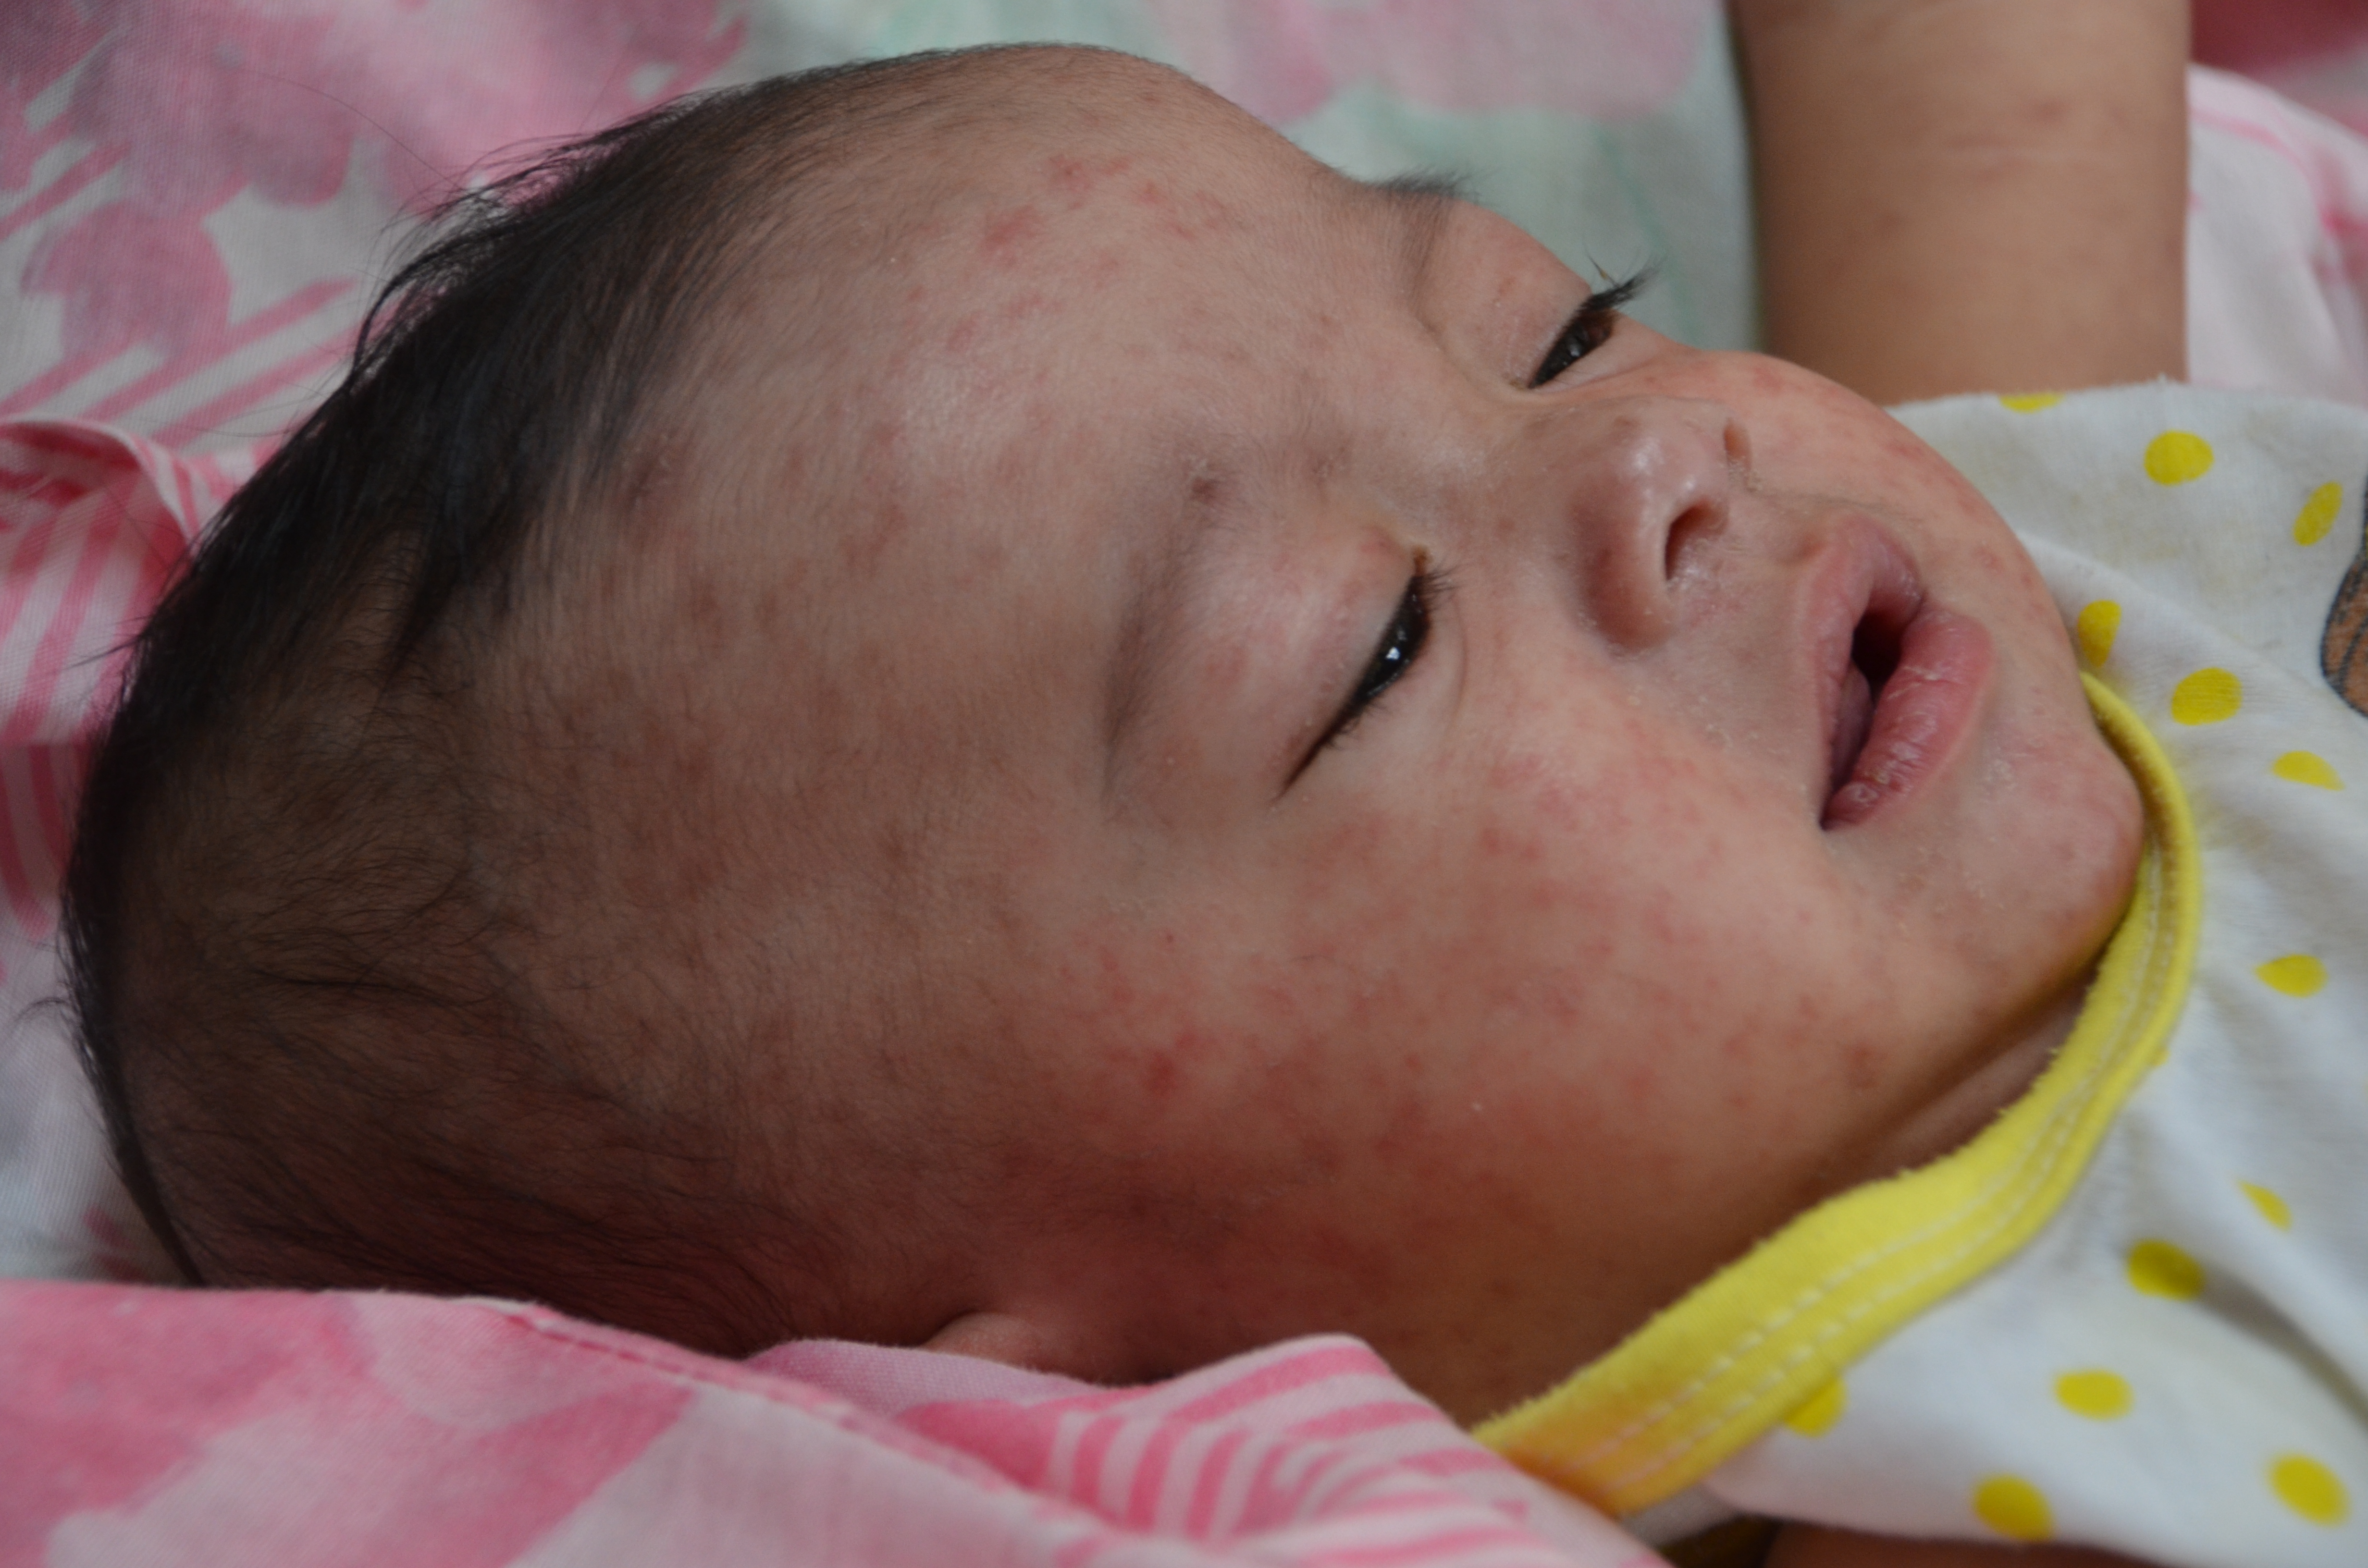 A baby with measles^[[Image](https://www.flickr.com/photos/cdcglobal/13627881194) by [CDC Global](https://www.flickr.com/photos/cdcglobal/) is licensed under [CC BY 2.0](https://creativecommons.org/licenses/by/2.0/)]